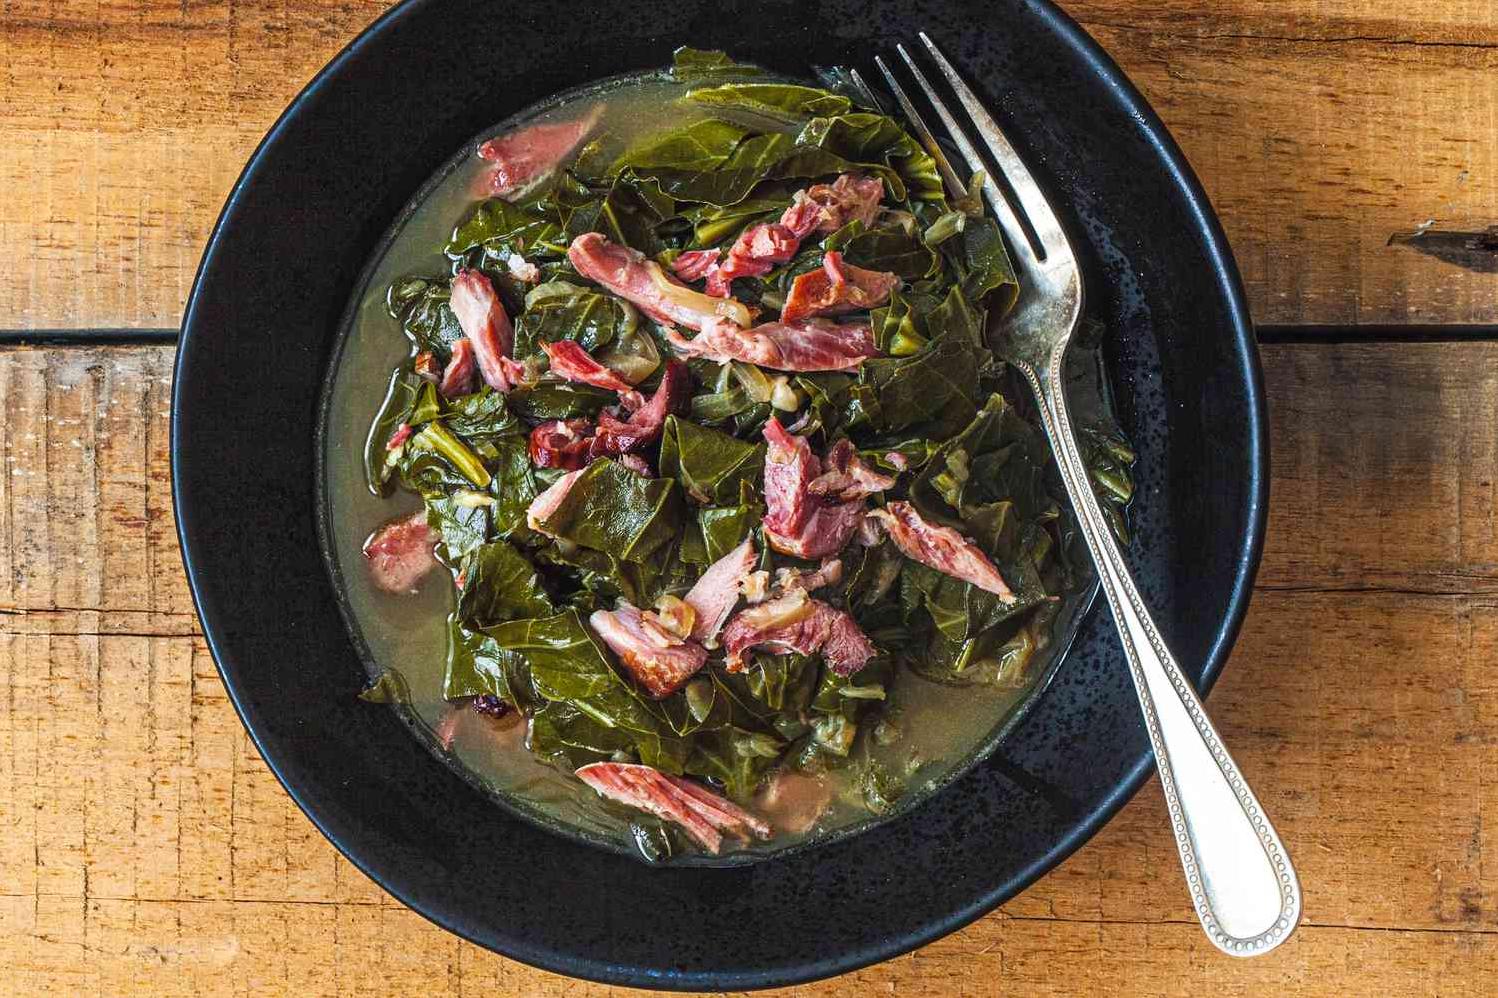  Melt-in-your-mouth goodness that will make these southern style greens a household staple.